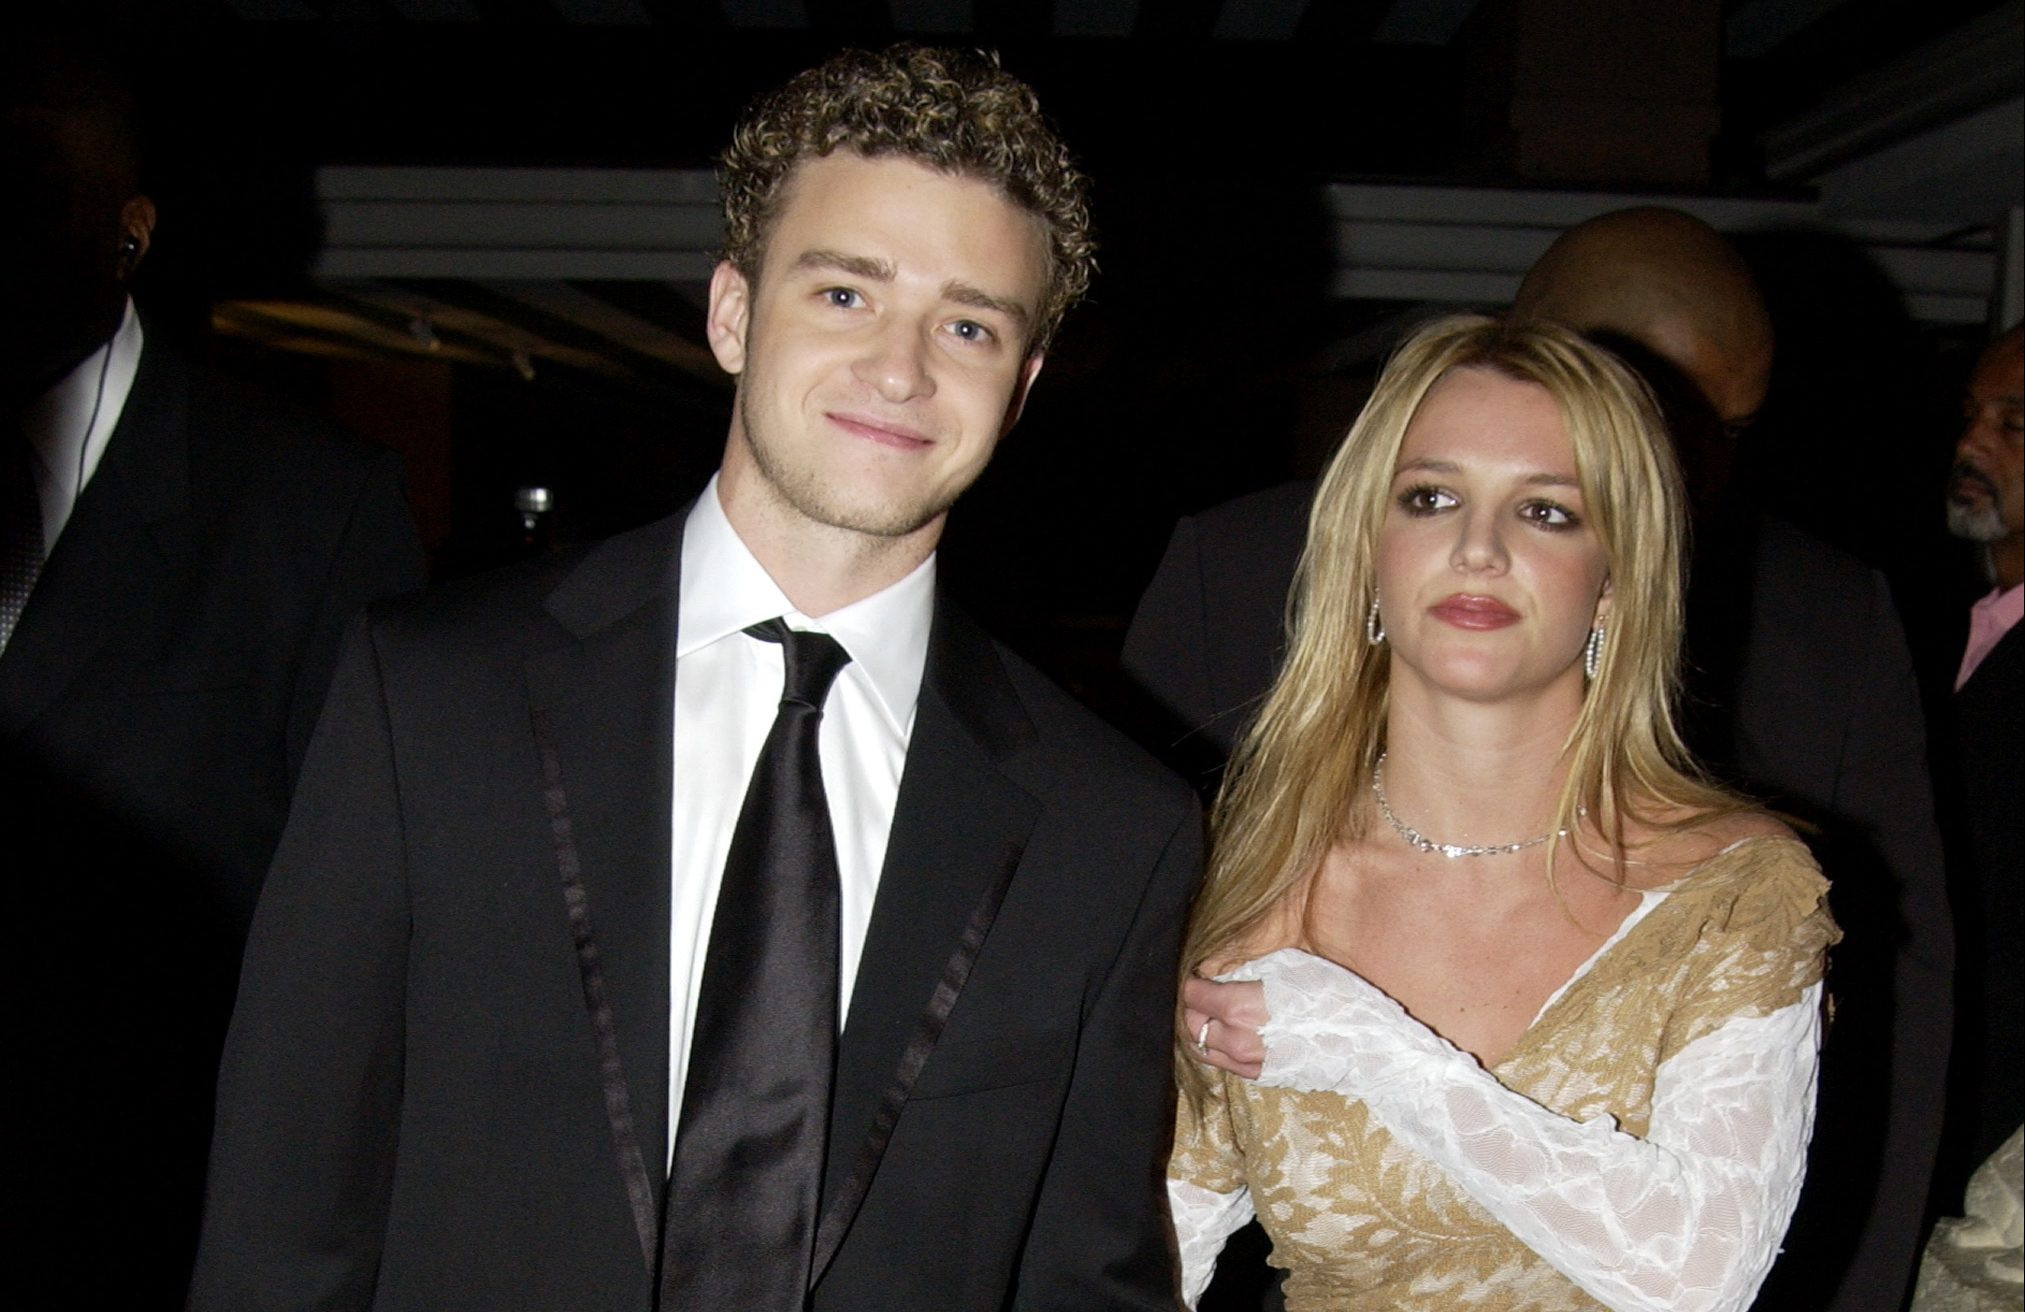 Britney Spears has ‘no grudge’ against ex-boyfriend Justin Timberlake in wake of documentary